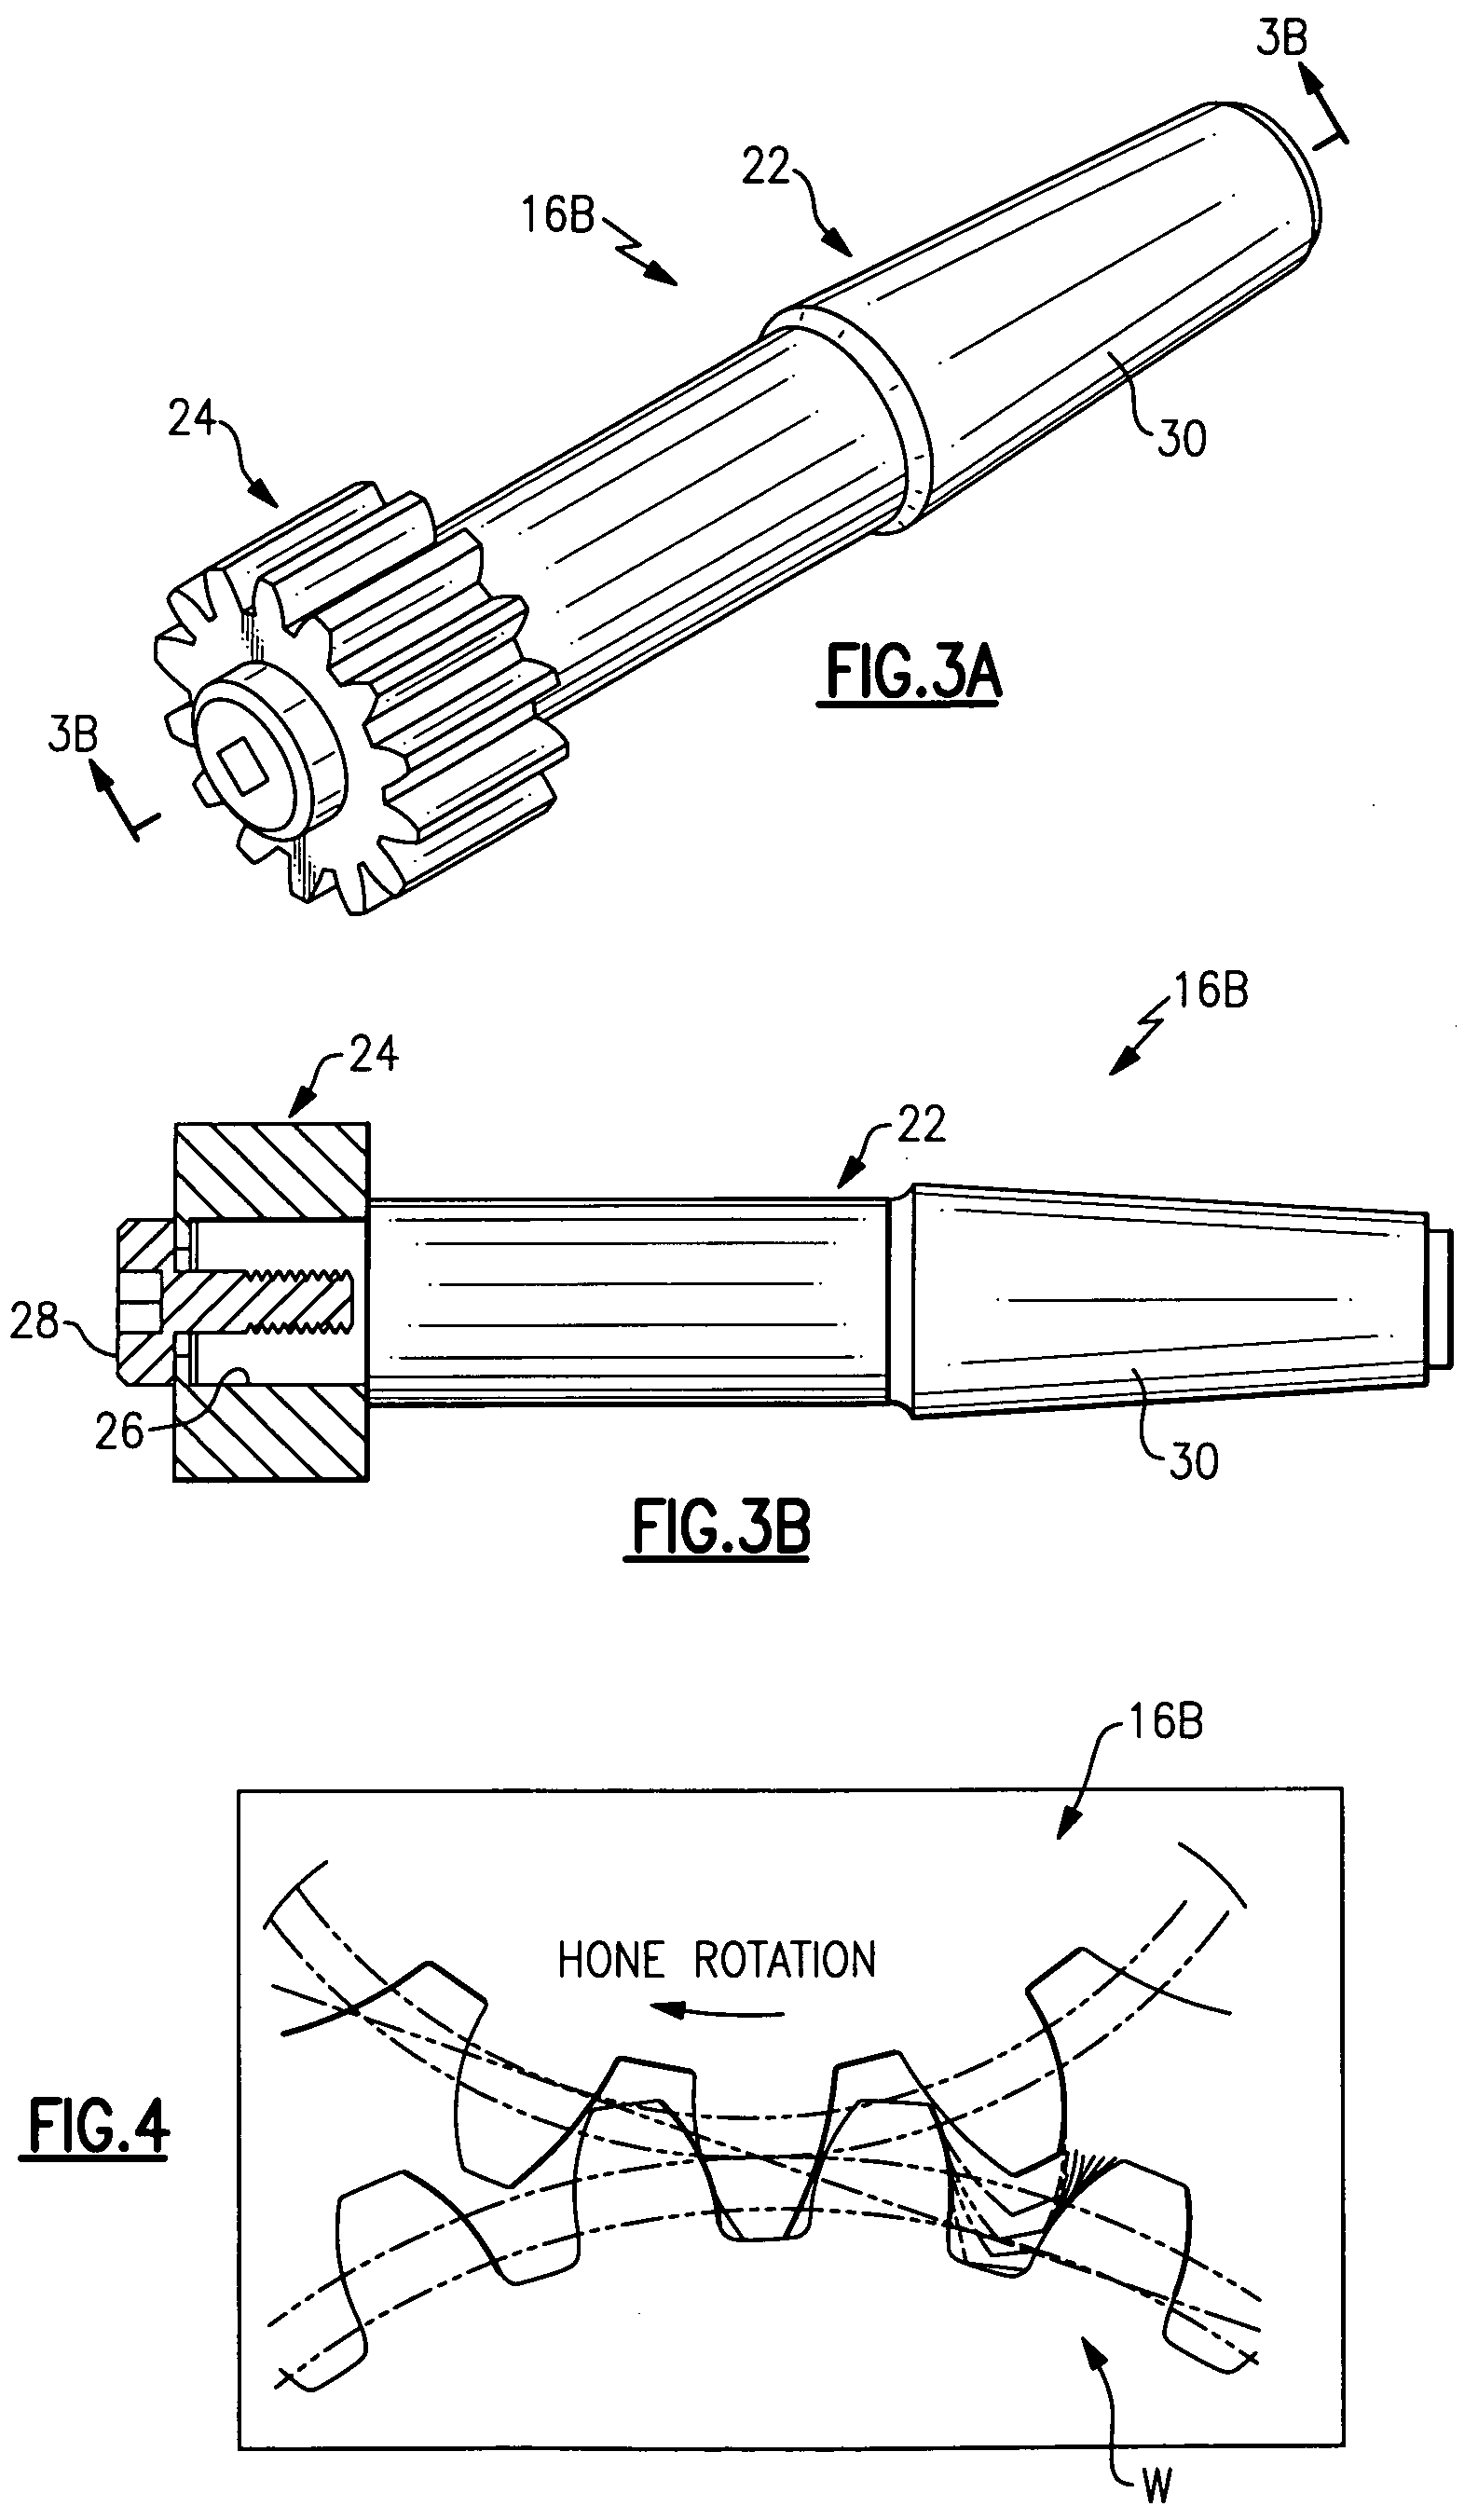 System and method for precision machining of high hardness gear teeth and splines